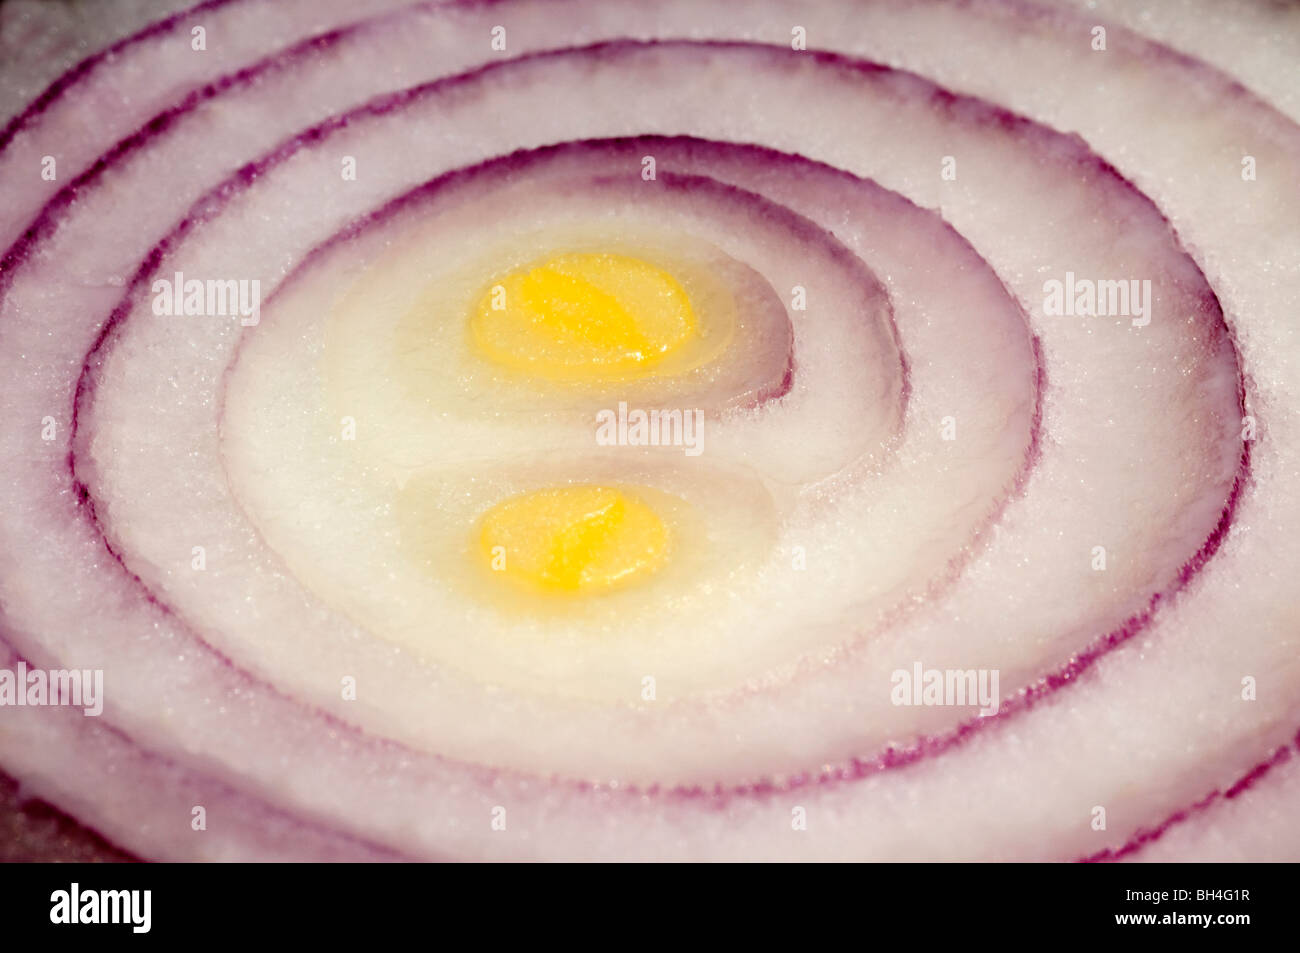 Close up abstract of a sliced section of the red onion showing pattern of red concentric rings. Stock Photo